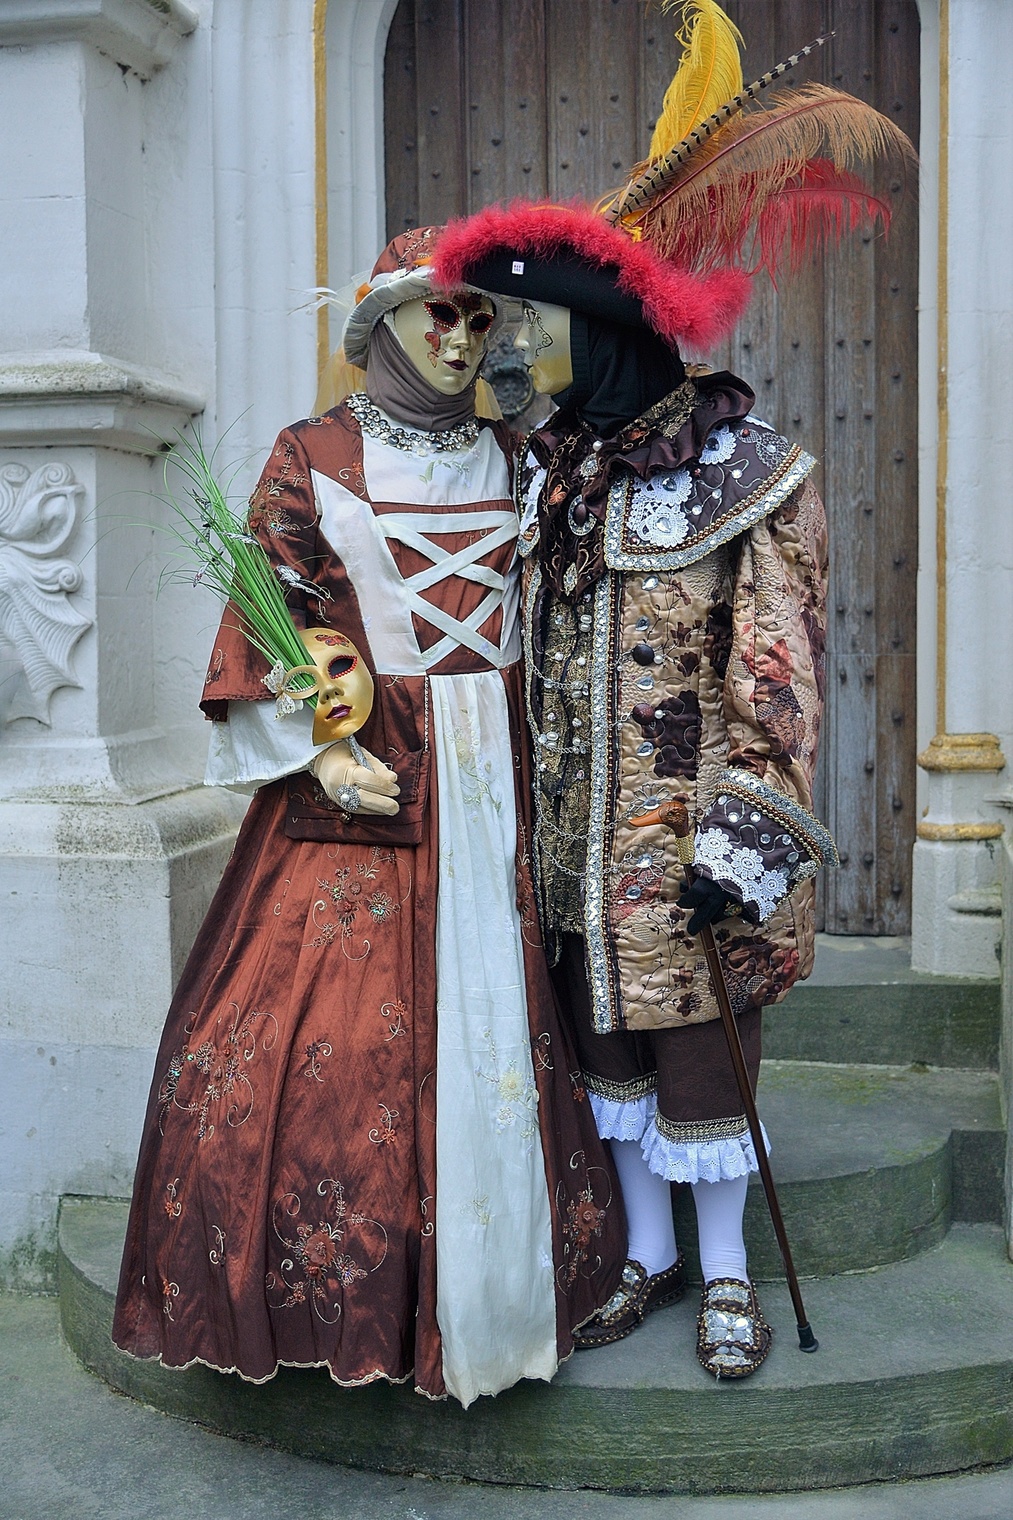 The costumes of Venice.